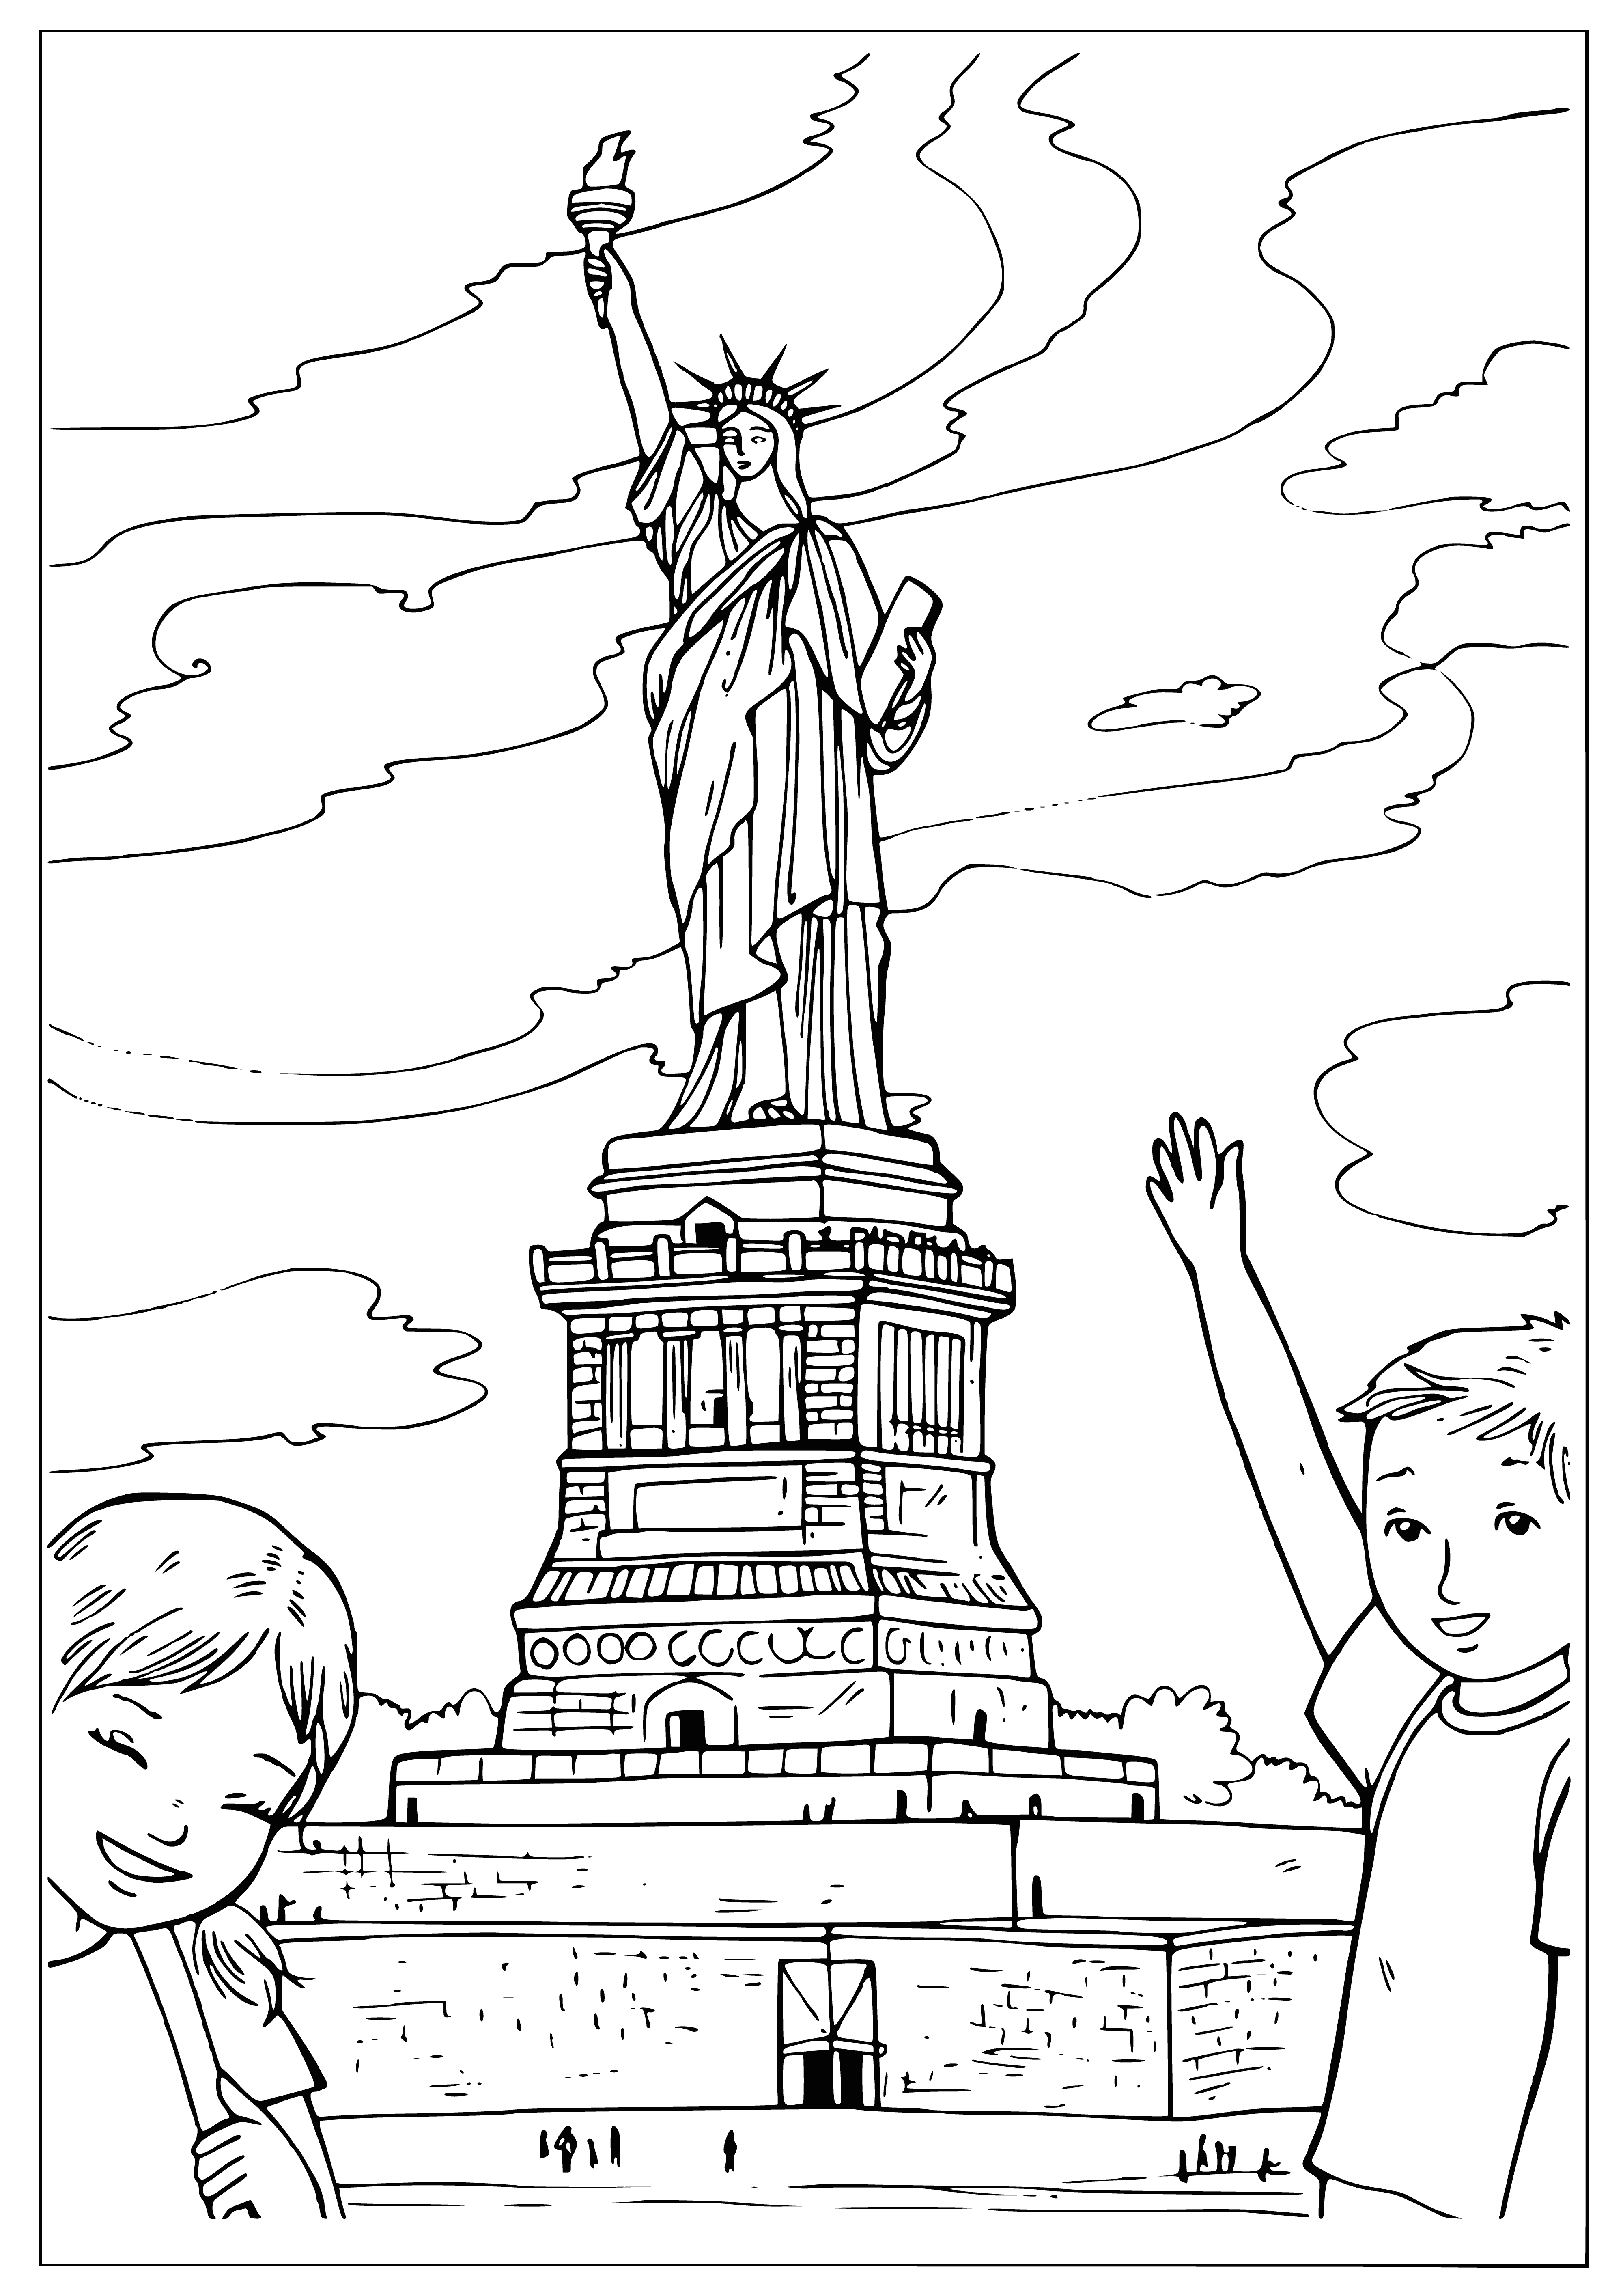 coloring page: The Statue of Liberty is a symbol of freedom, a gift from France to the U.S. presented on October 28th 1886. Torch & tabula ansata remind of the Declaration of Independence on July 4, 1776. Liberty Island is in New York Harbor.